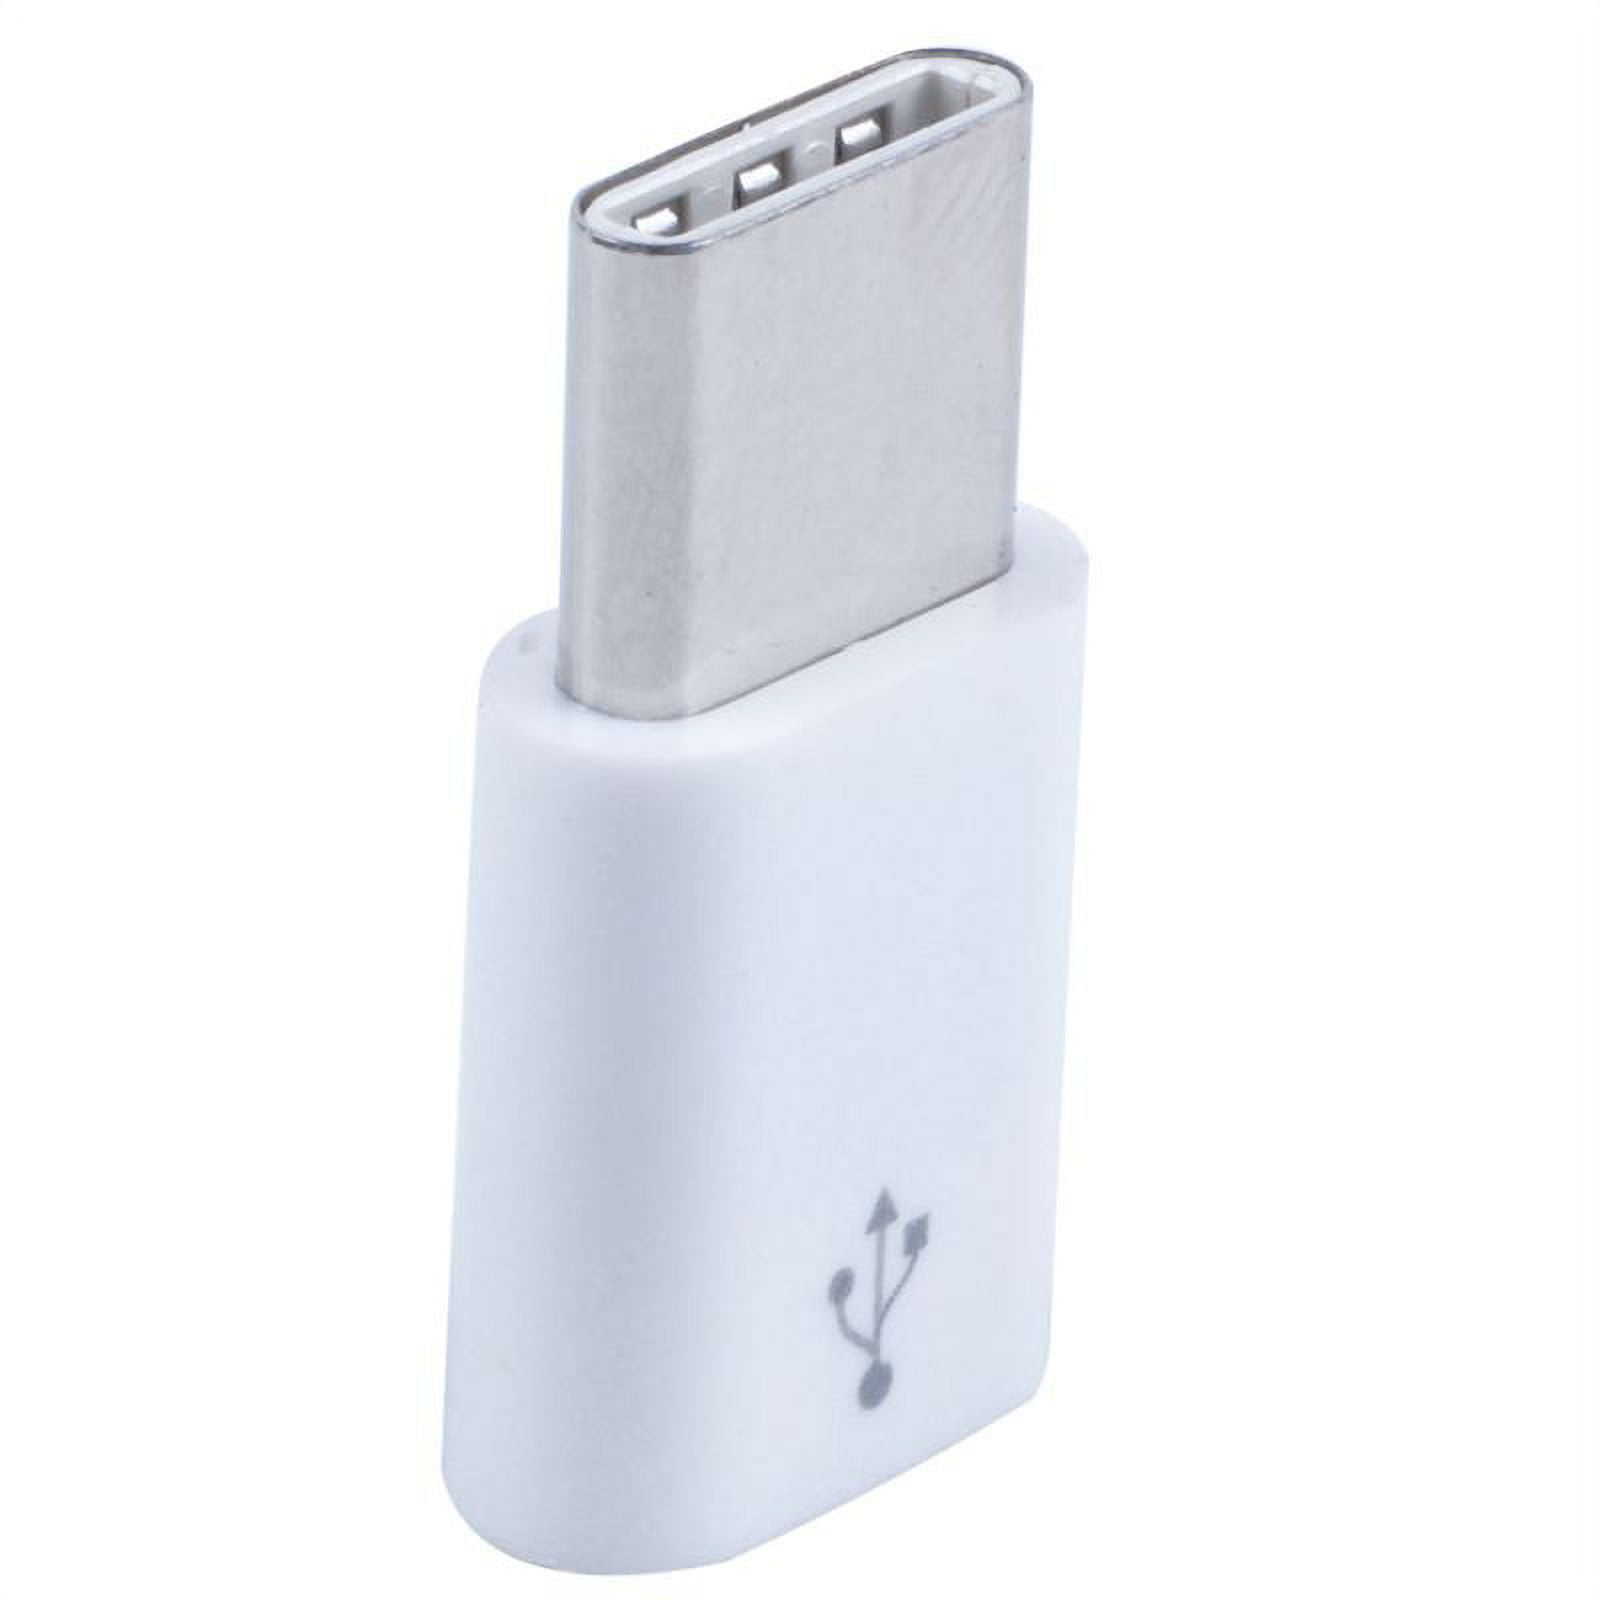 OTG Adapter Dongle Cable 30Pin To Female USB Samsung Galaxy Tab  7.0/8.9/10.1-Inch 